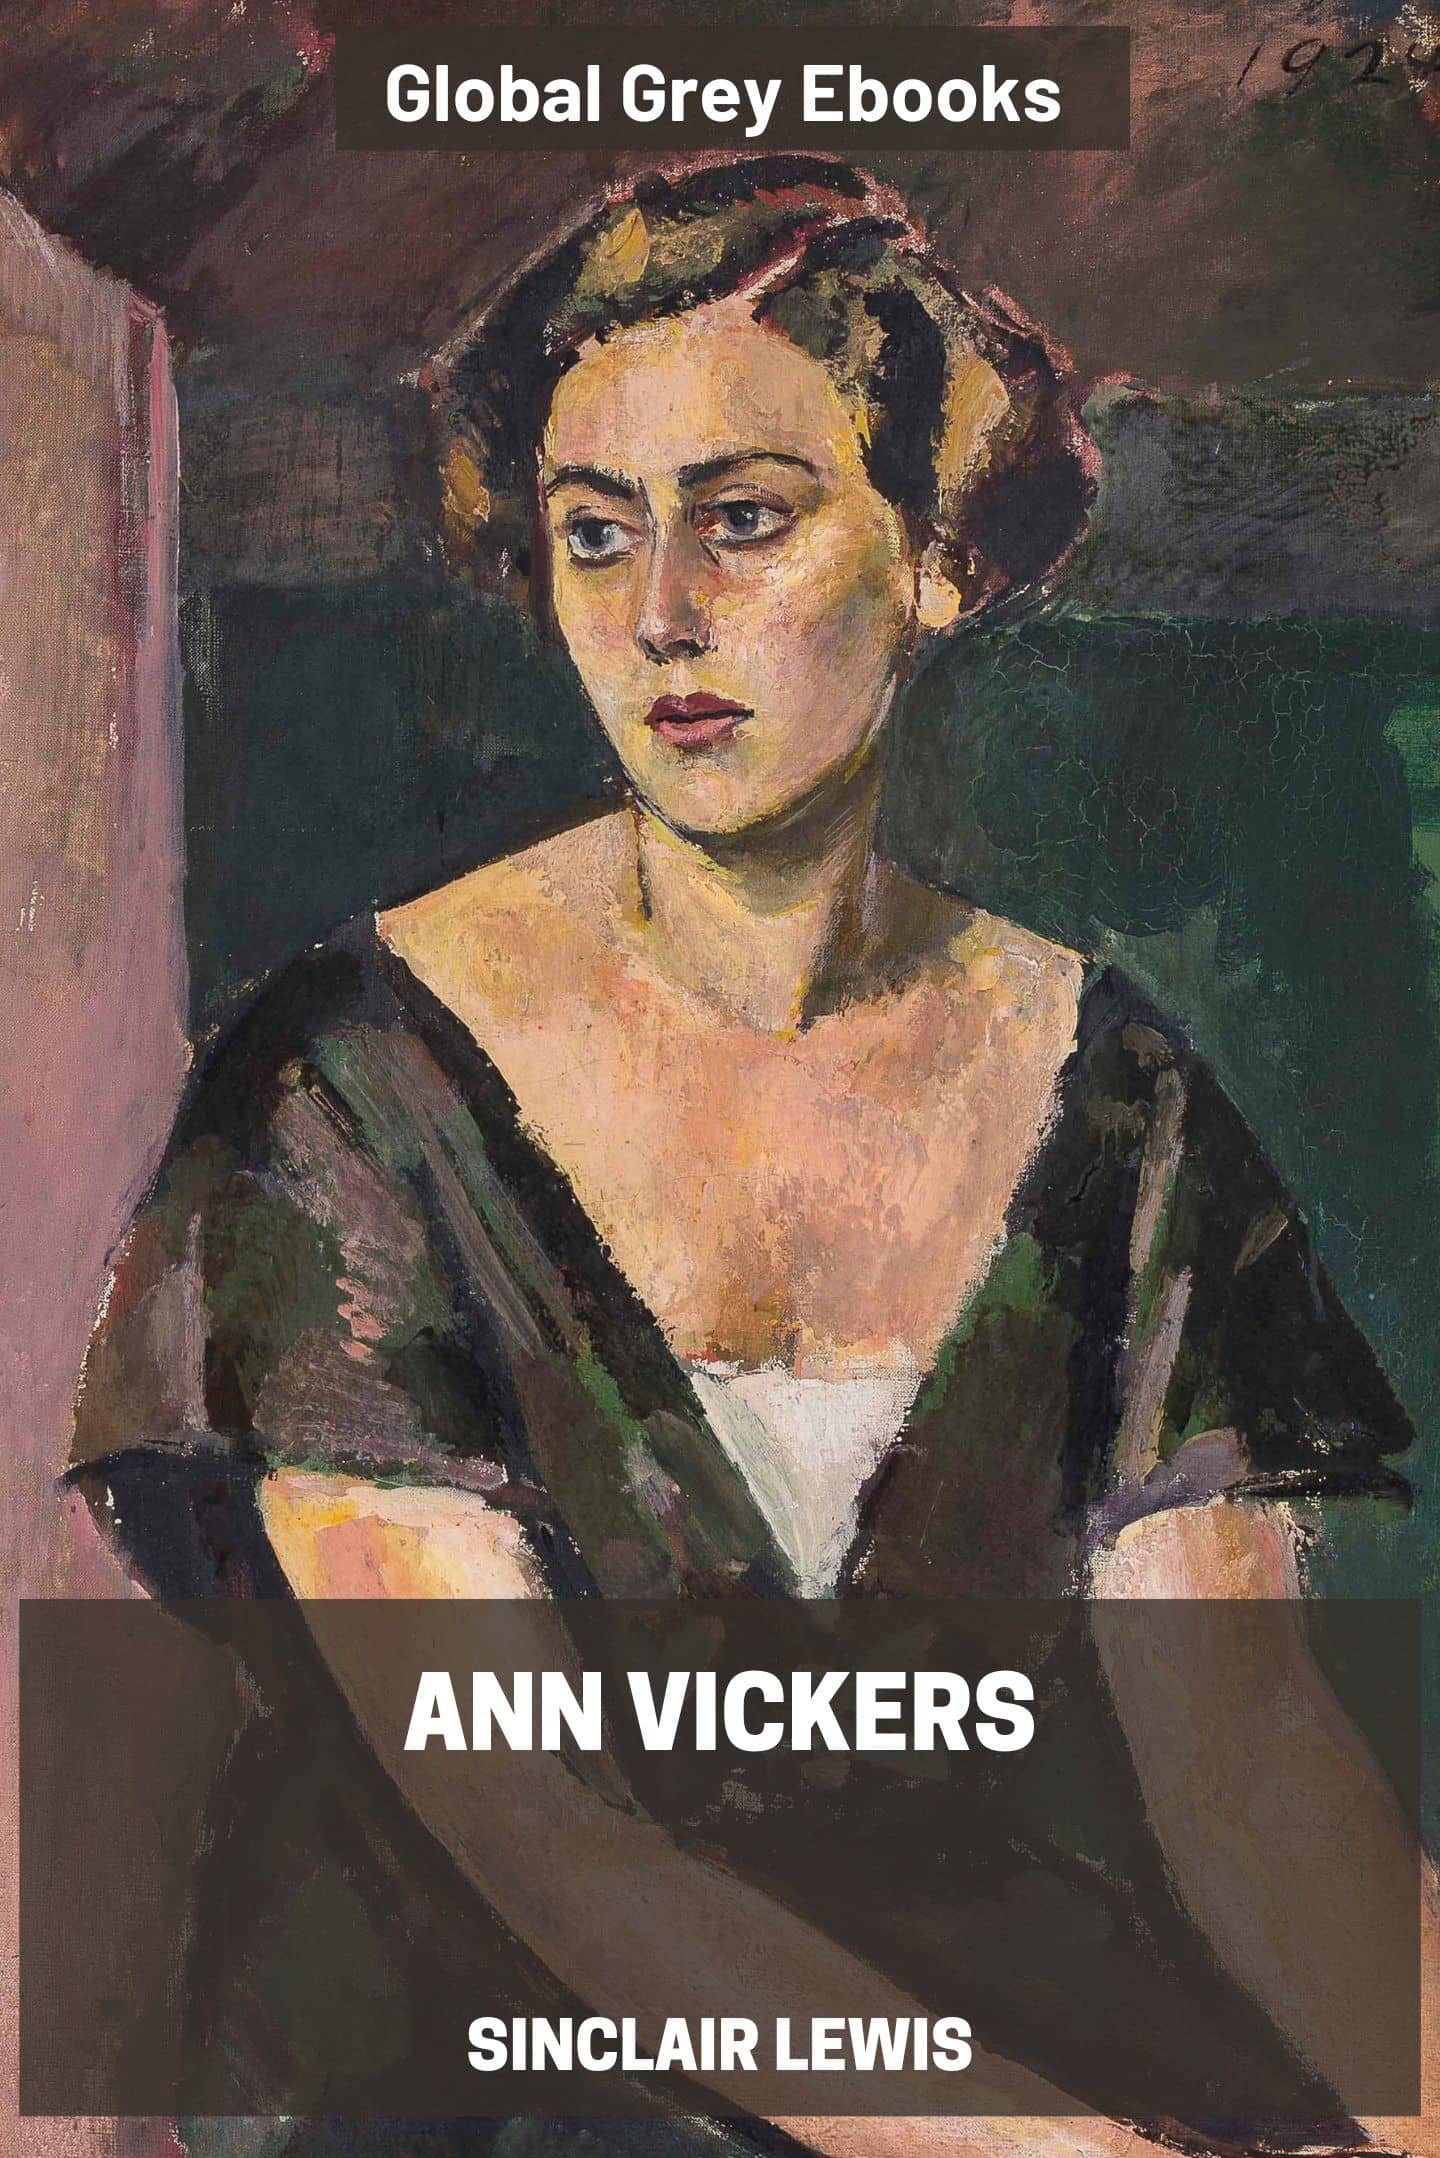 Ann Vickers by Sinclair Lewis - Complete text online - Global Grey ebooks